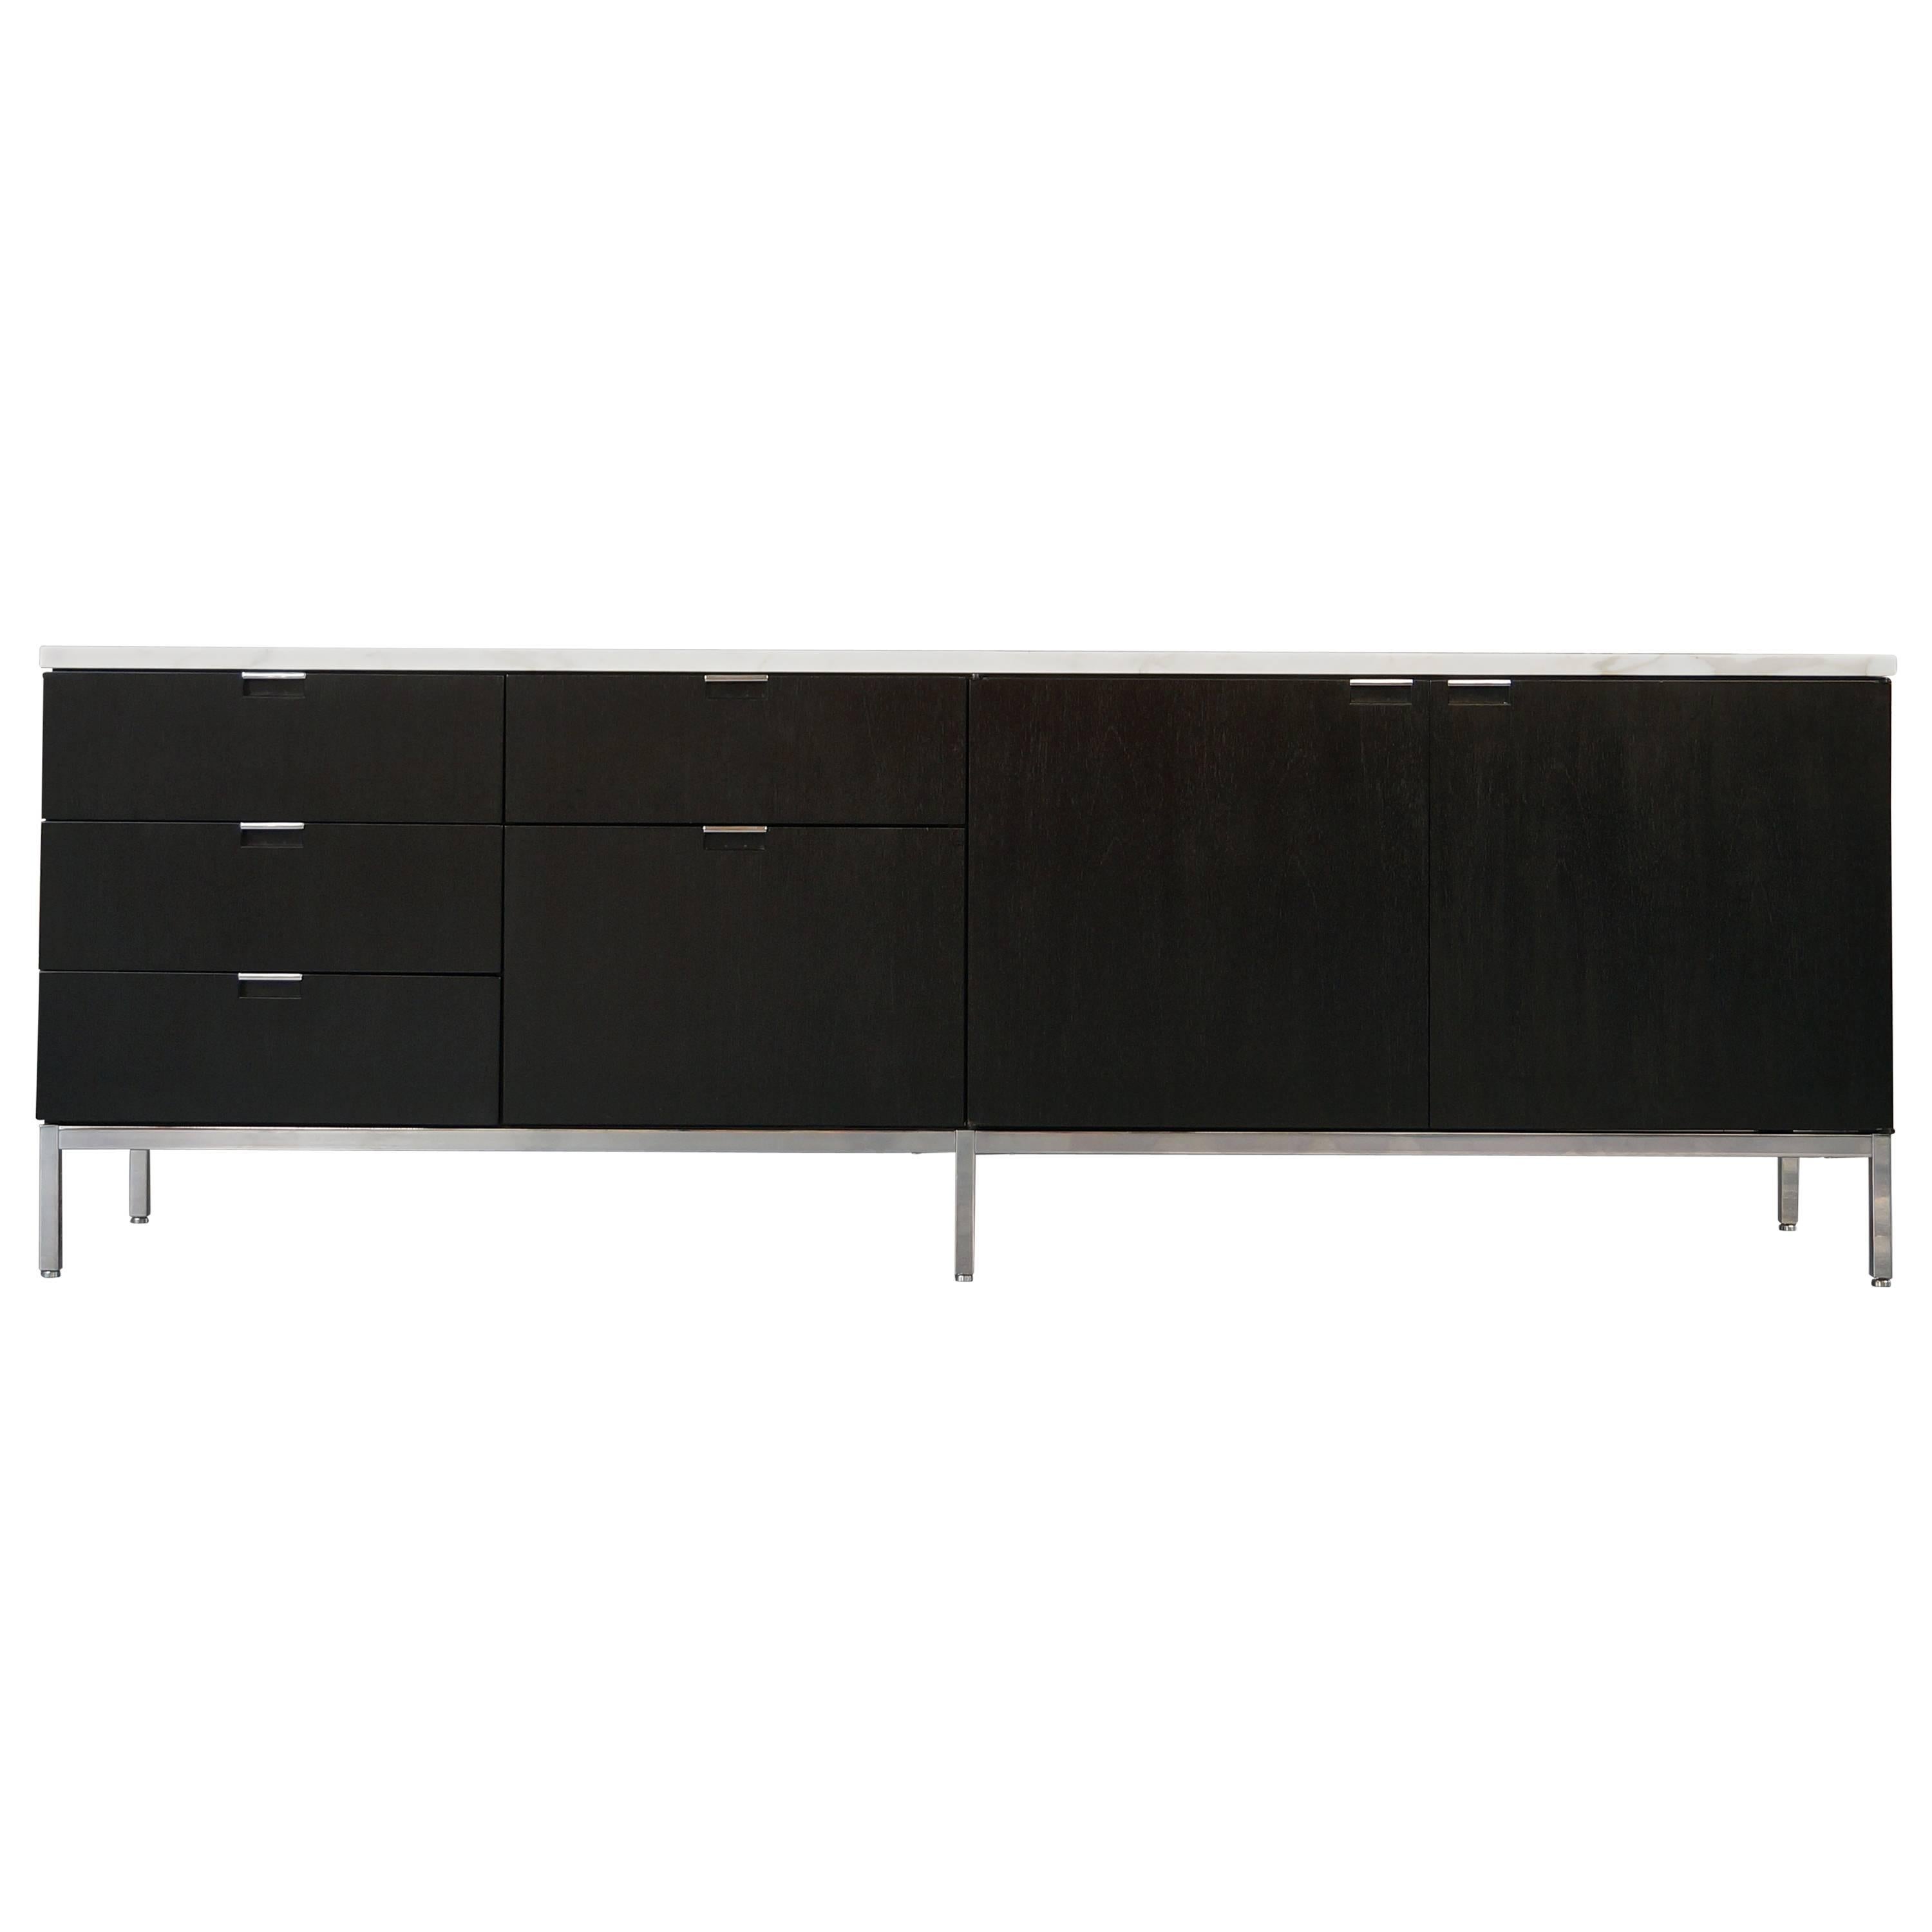 Florence Knoll Calacatta Marble and Ebonized Oak Sideboard / Credenza 190 (2)